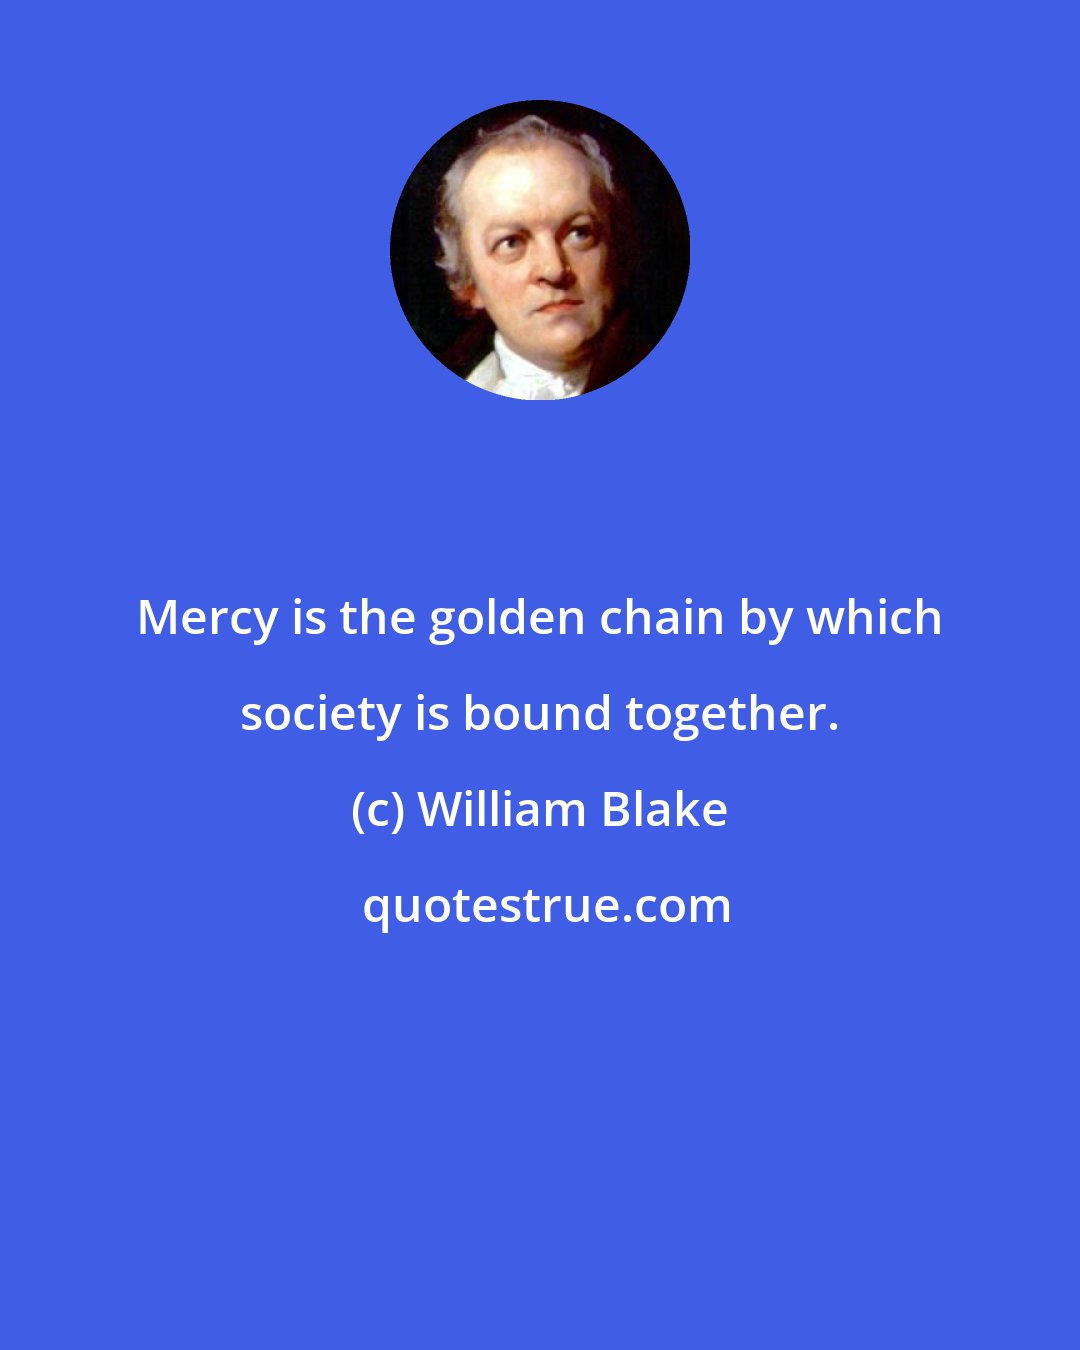 William Blake: Mercy is the golden chain by which society is bound together.